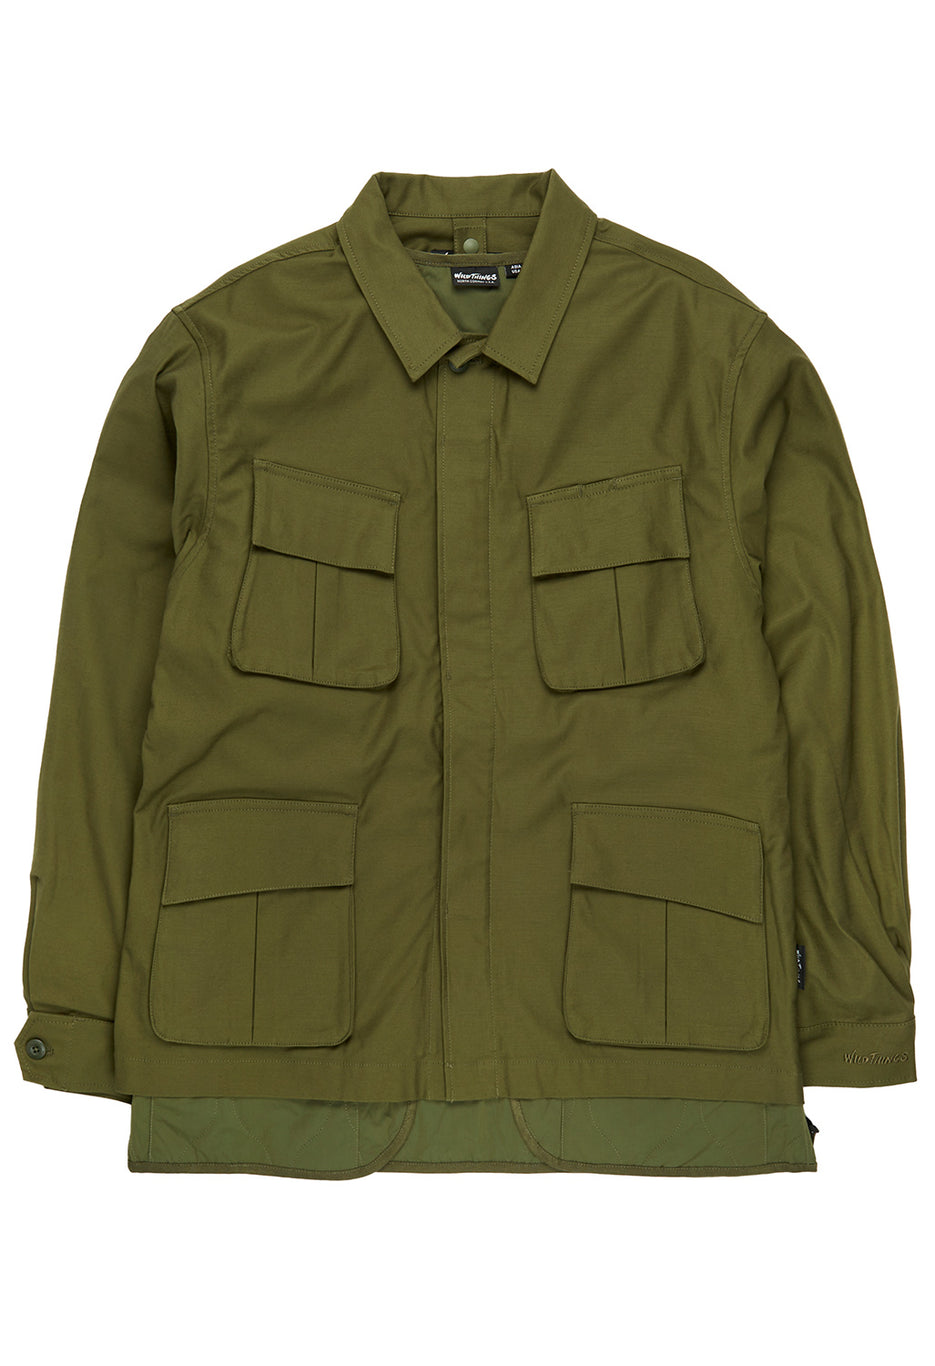 Wild Things Men's Bdu Quilting Attachable 3-in-1 Jacket - Olive Drab